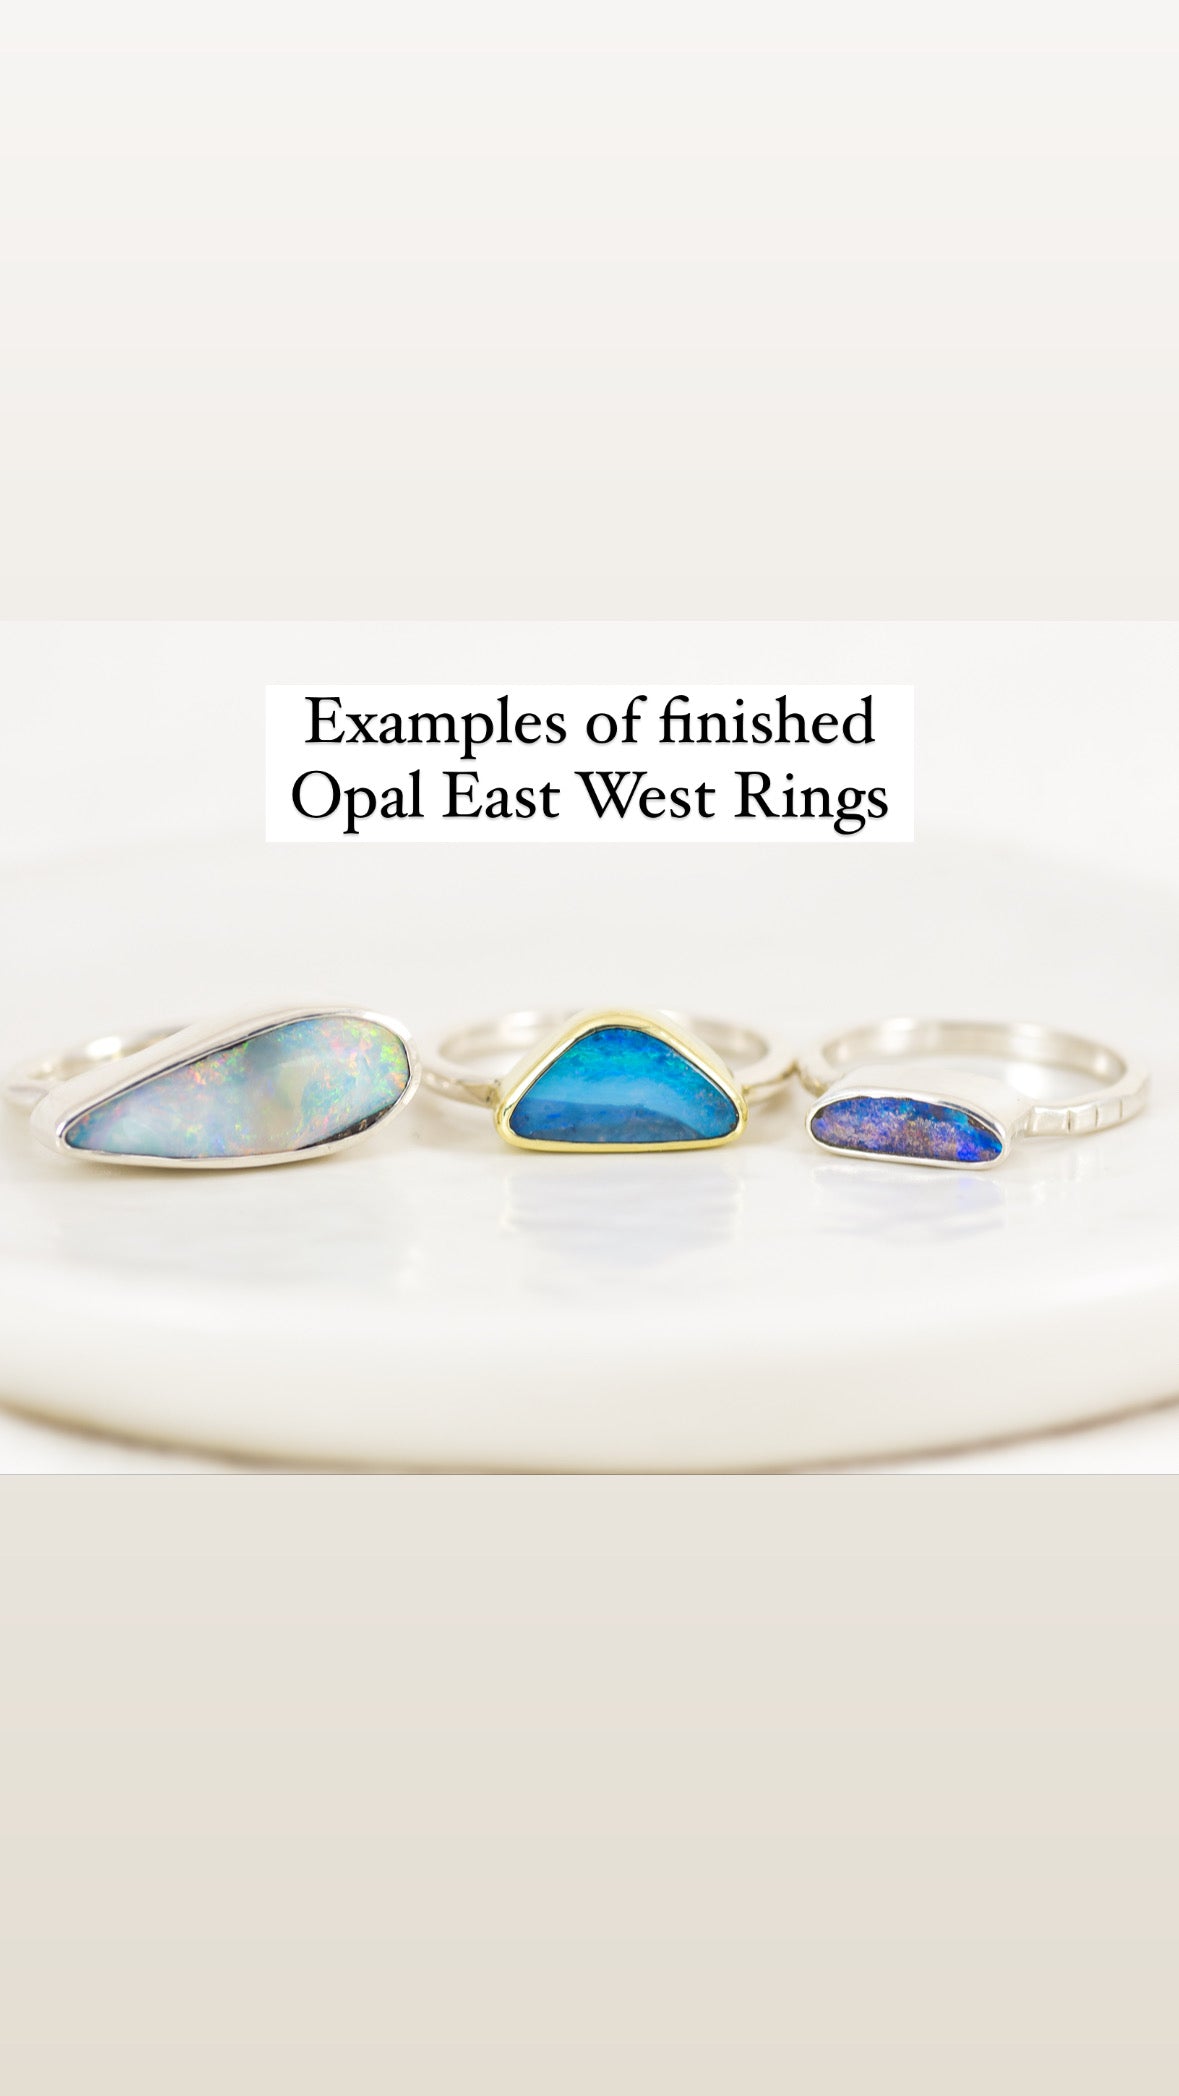 Opal East West Ring #8 (Pre-Order) ◇ Australian Opal ◇ Made in your size